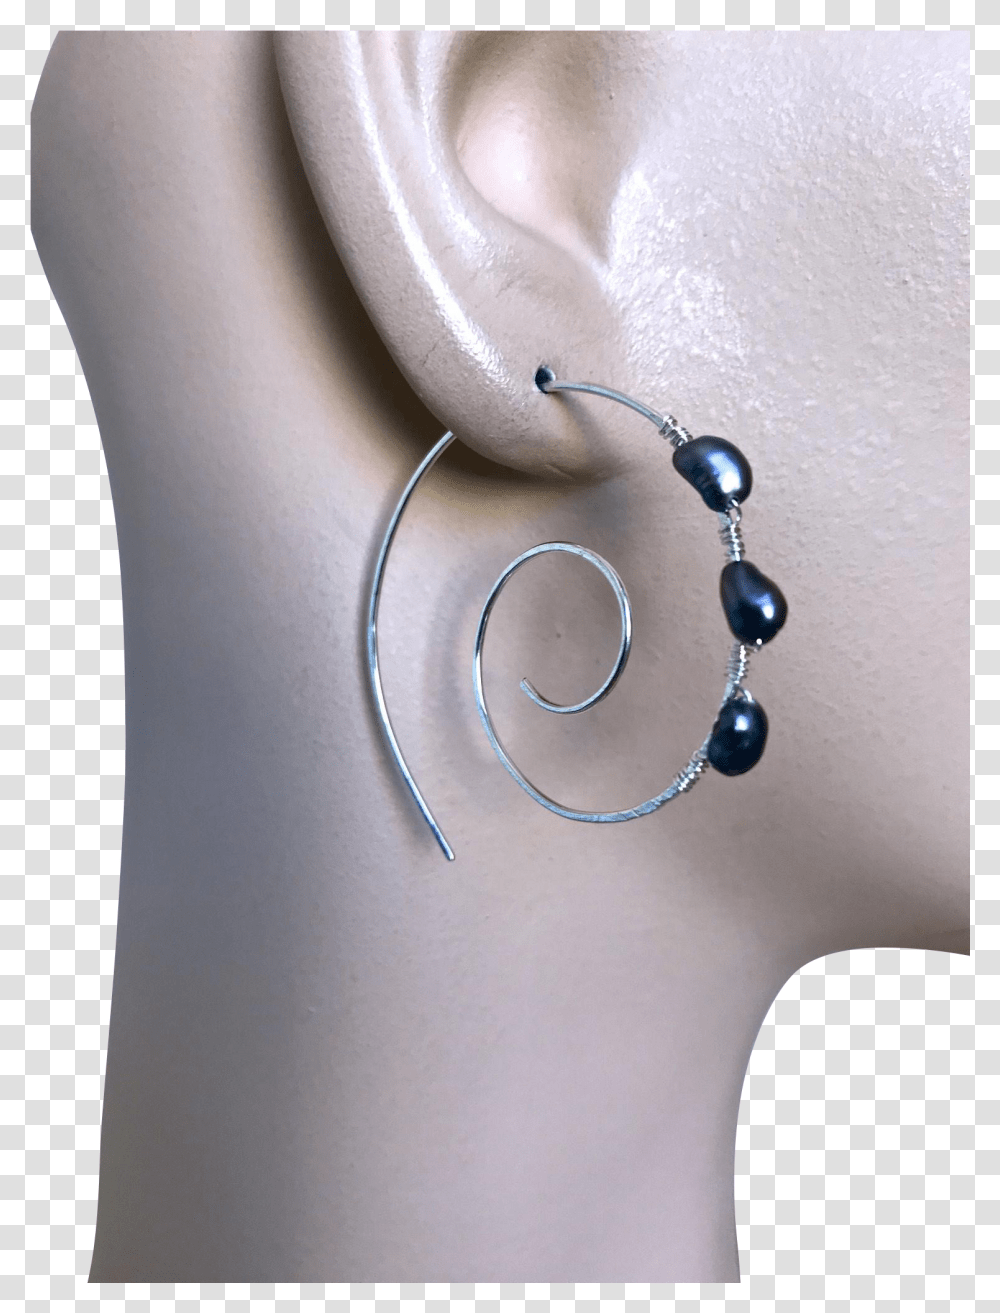 Silver Spiral Hoops Swirl Earrings Pearl Hoops Black, Necklace, Jewelry, Accessories, Accessory Transparent Png